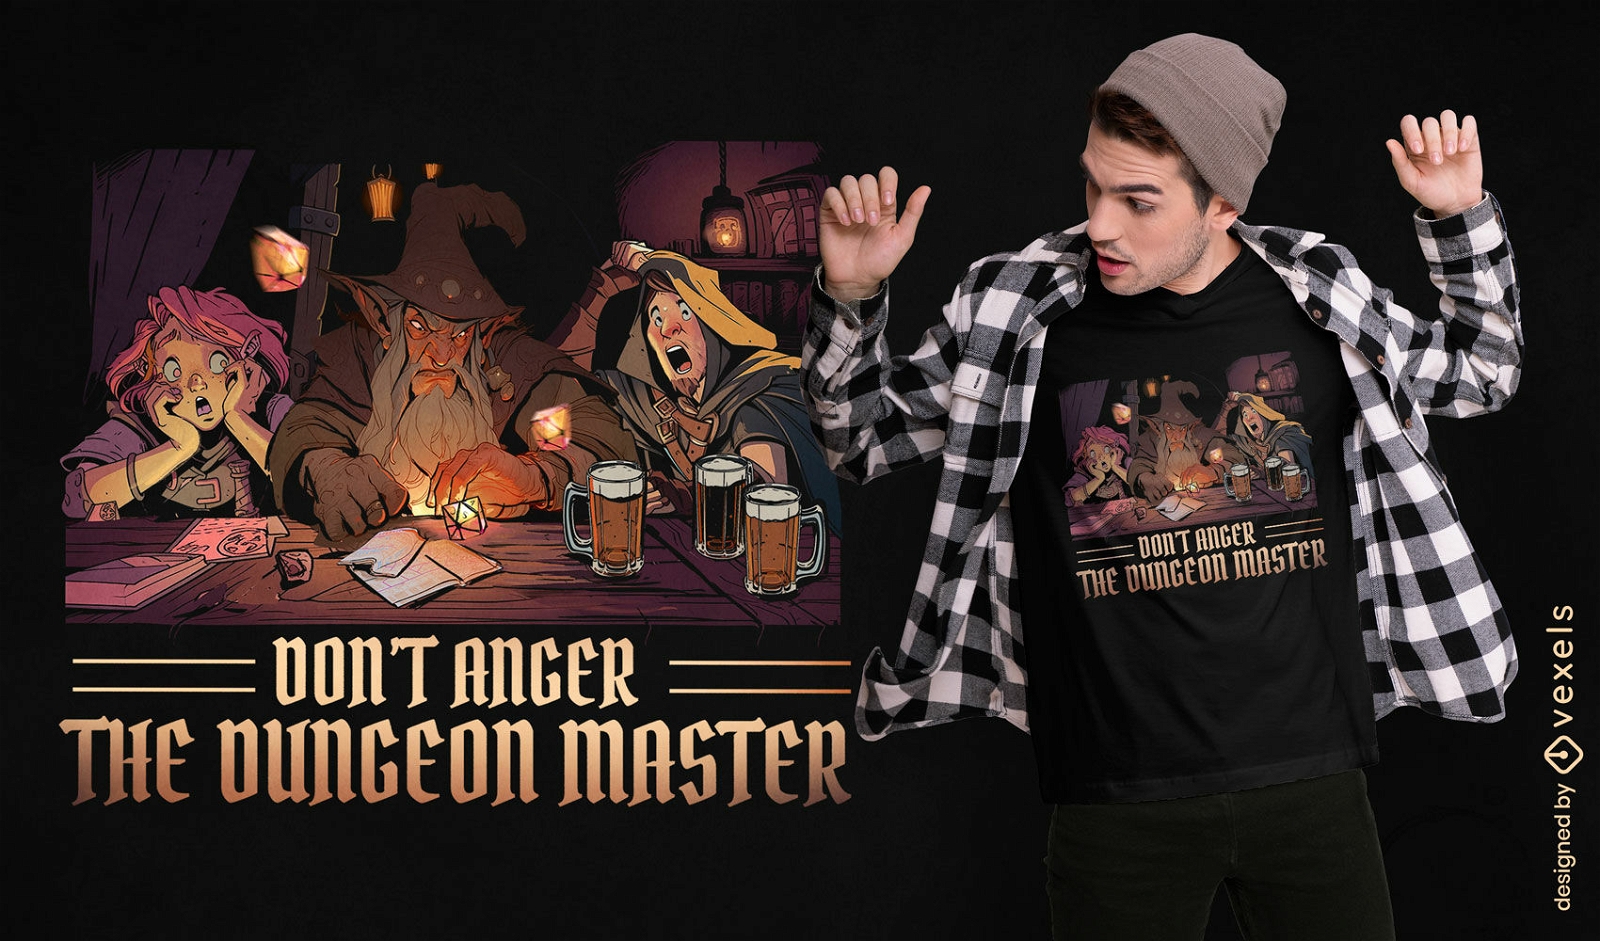 Dungeon master gaming quote t-shirt design